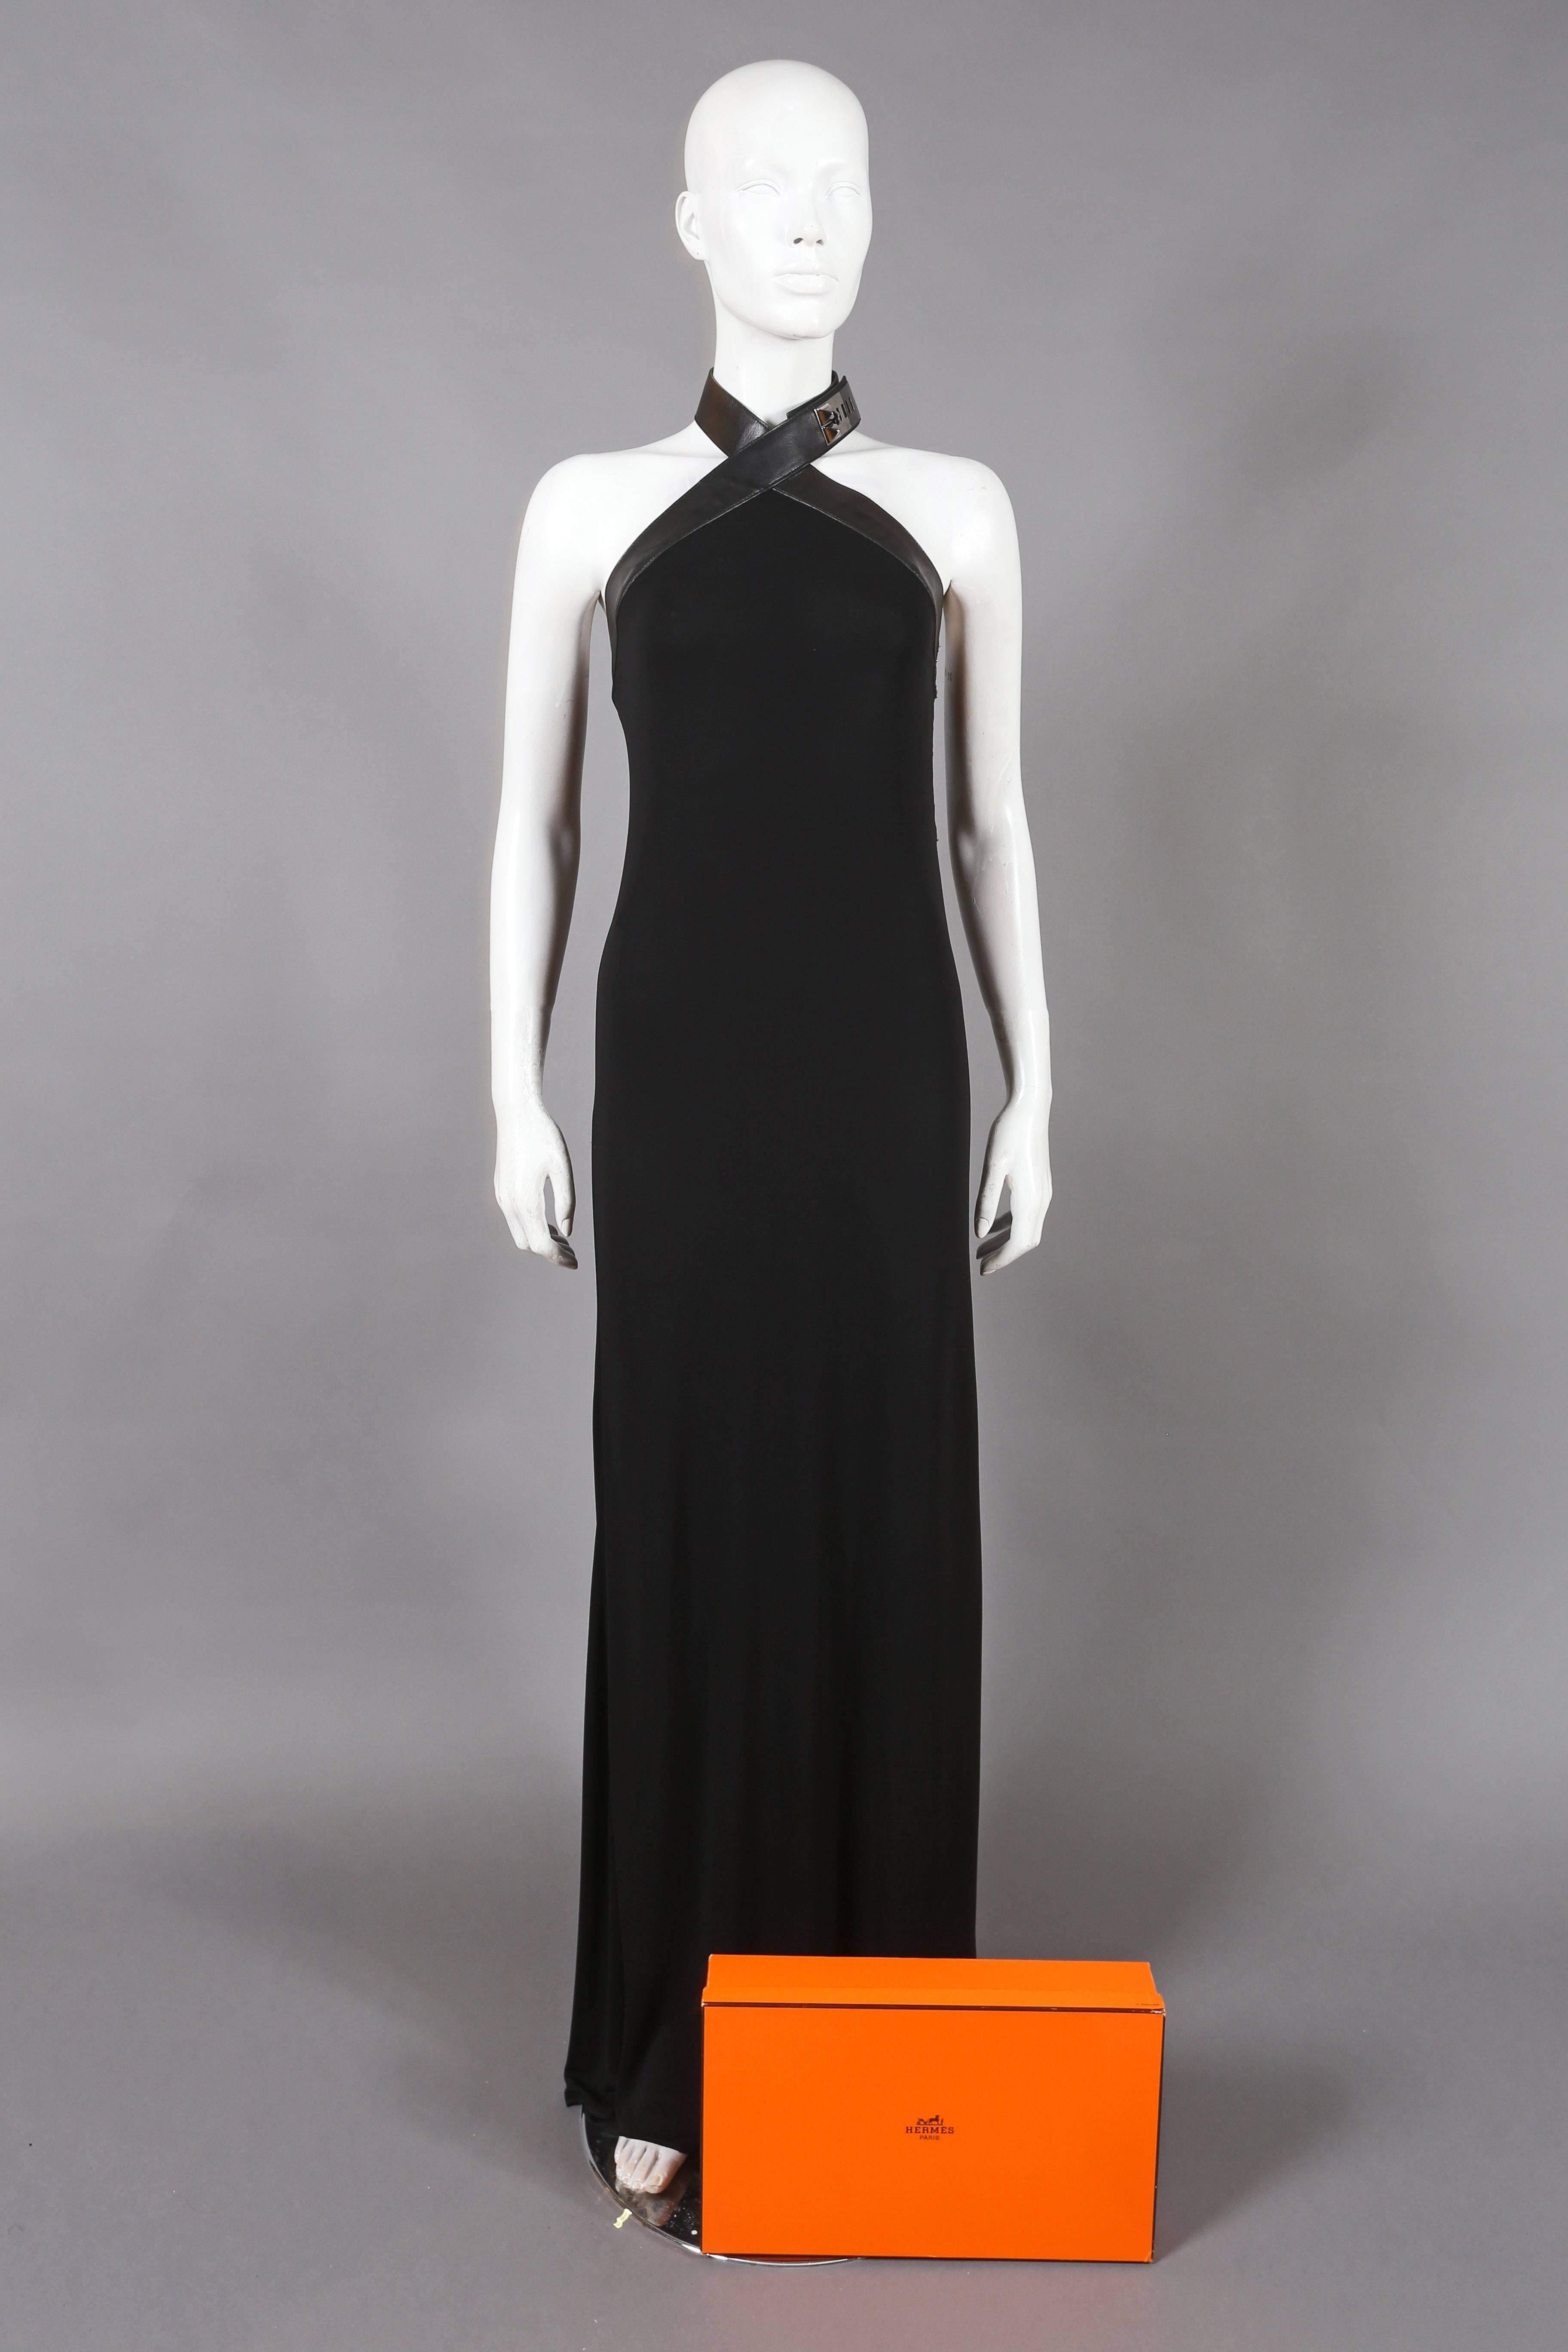 Fine and rare HERMES black silk jersey evening dress from the autumn - winter 2009 - 2010 collection designed by JEAN PAUL GAULTIER. The dress features a black leather halter neck strap with a palladium Collier de Chien lock closure. 

Stamp 'N'